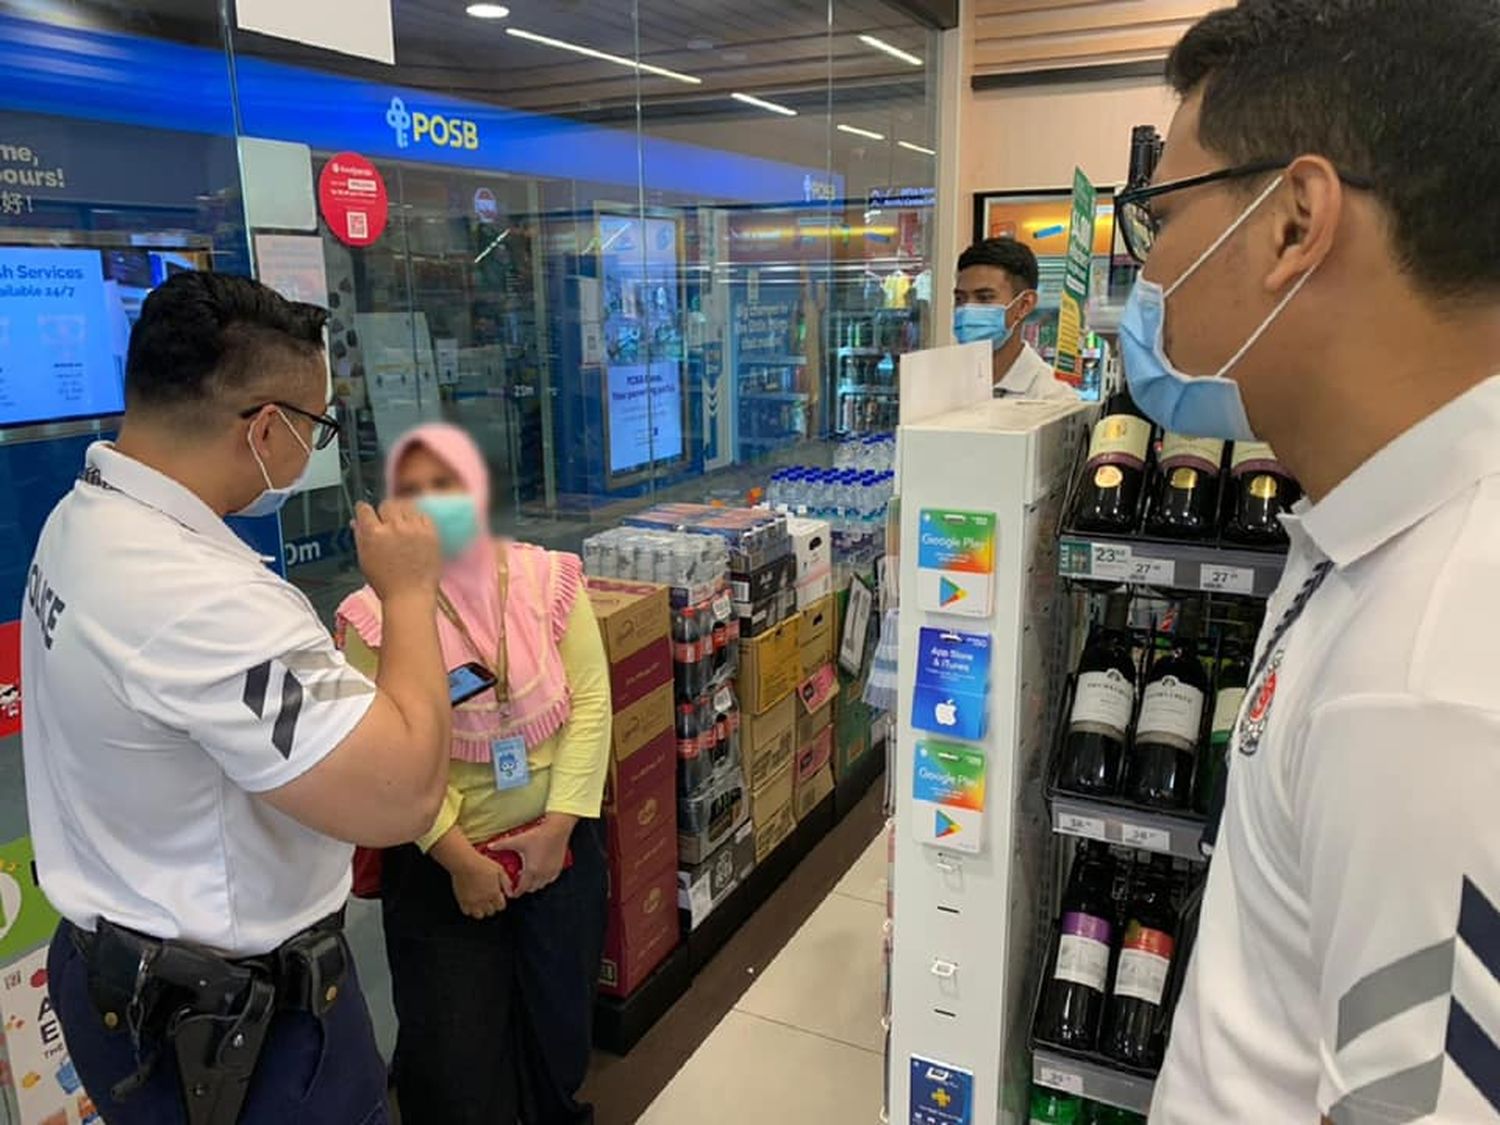 three CPU officers speaking to a lady whose face is blurred in a convenience store